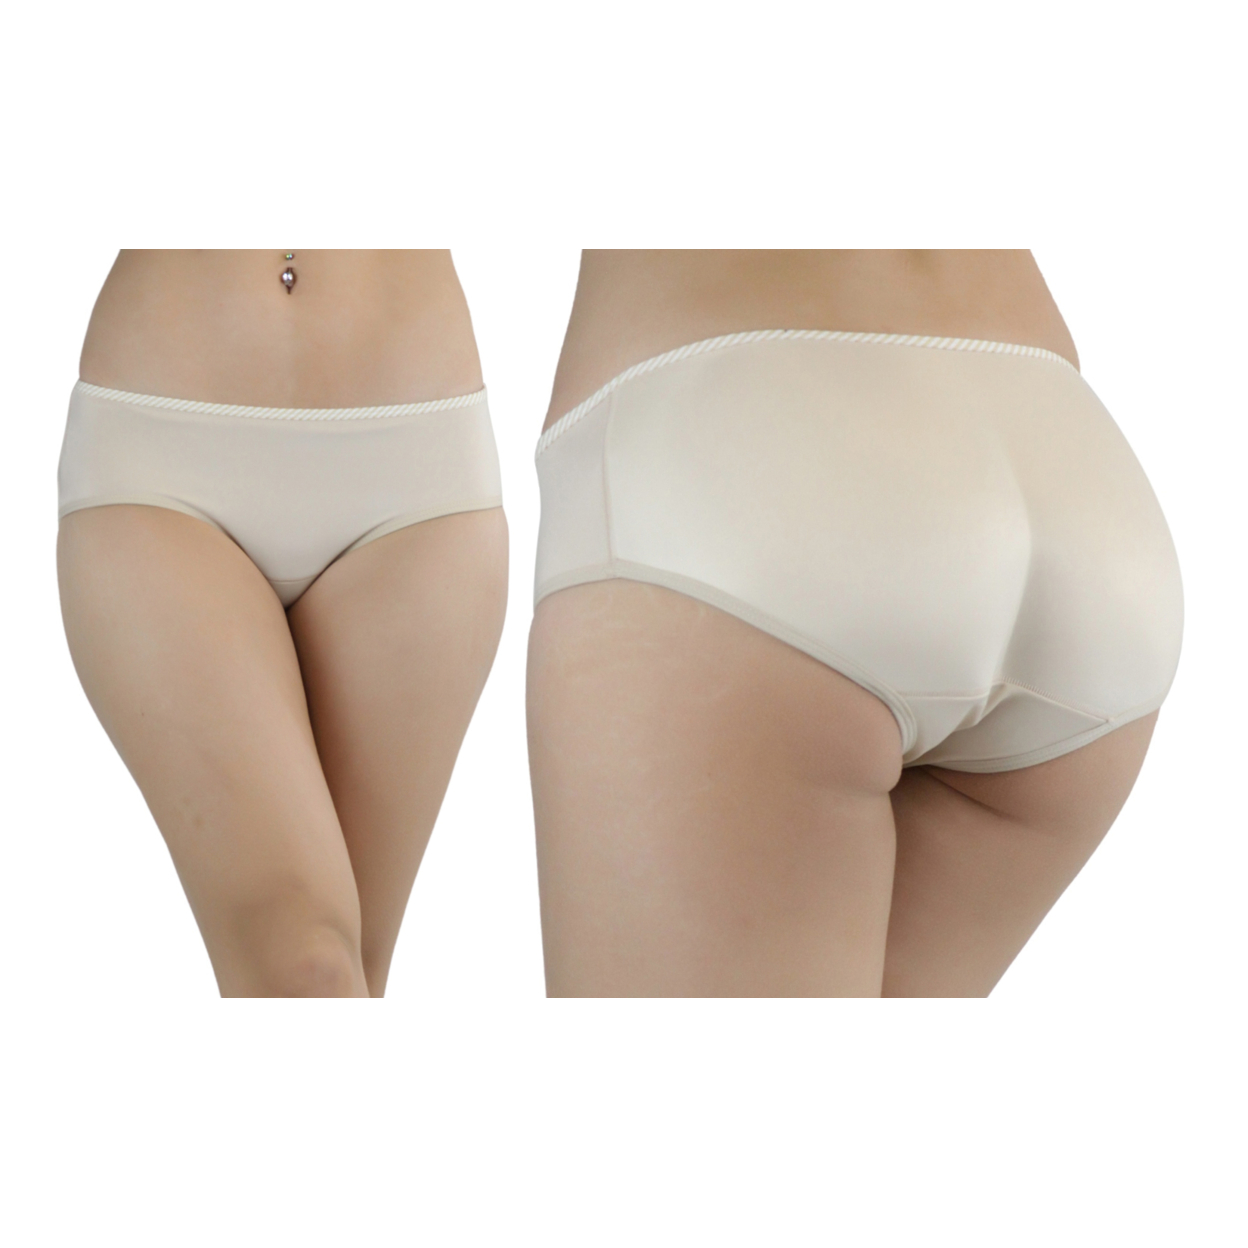 Women's Instant Booty Boosters Padded Panty - Beige, M